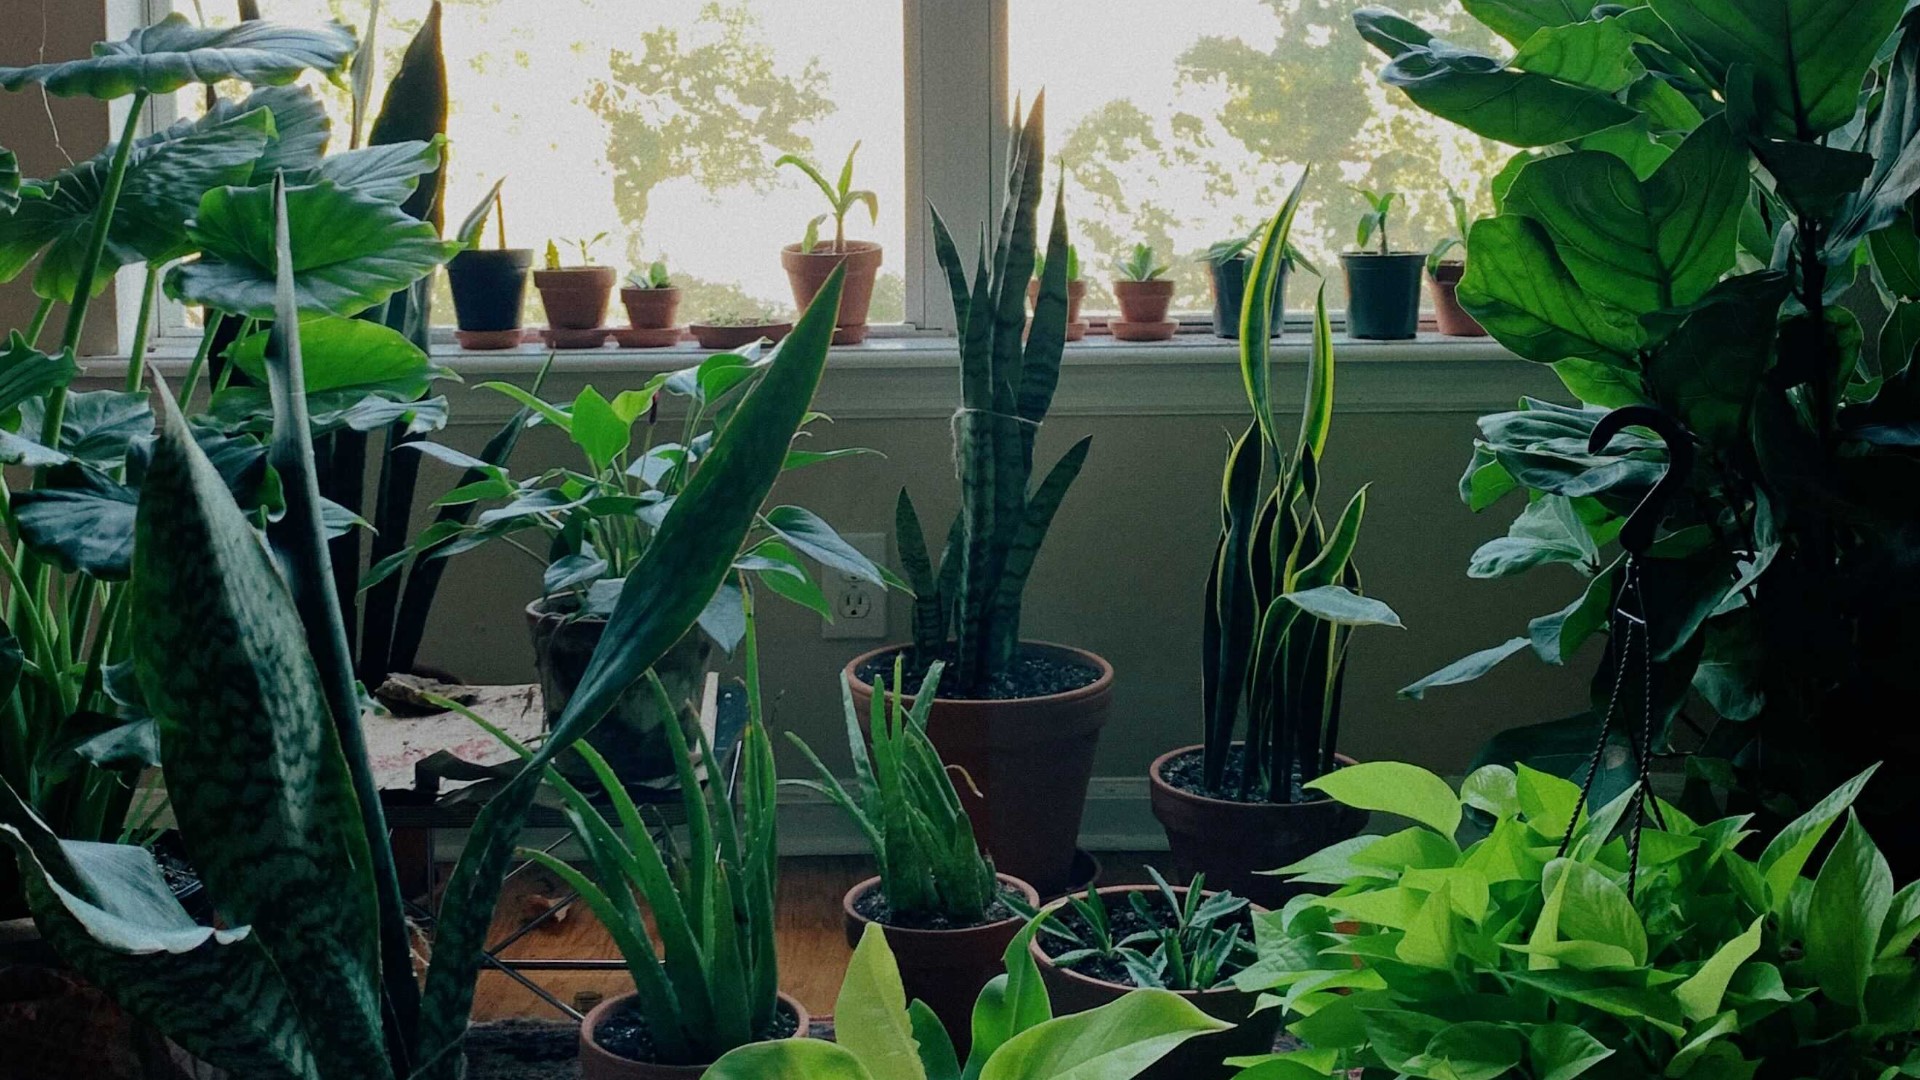 If you were one of the many people who became a plant parent during the pandemic, you’re not alone.